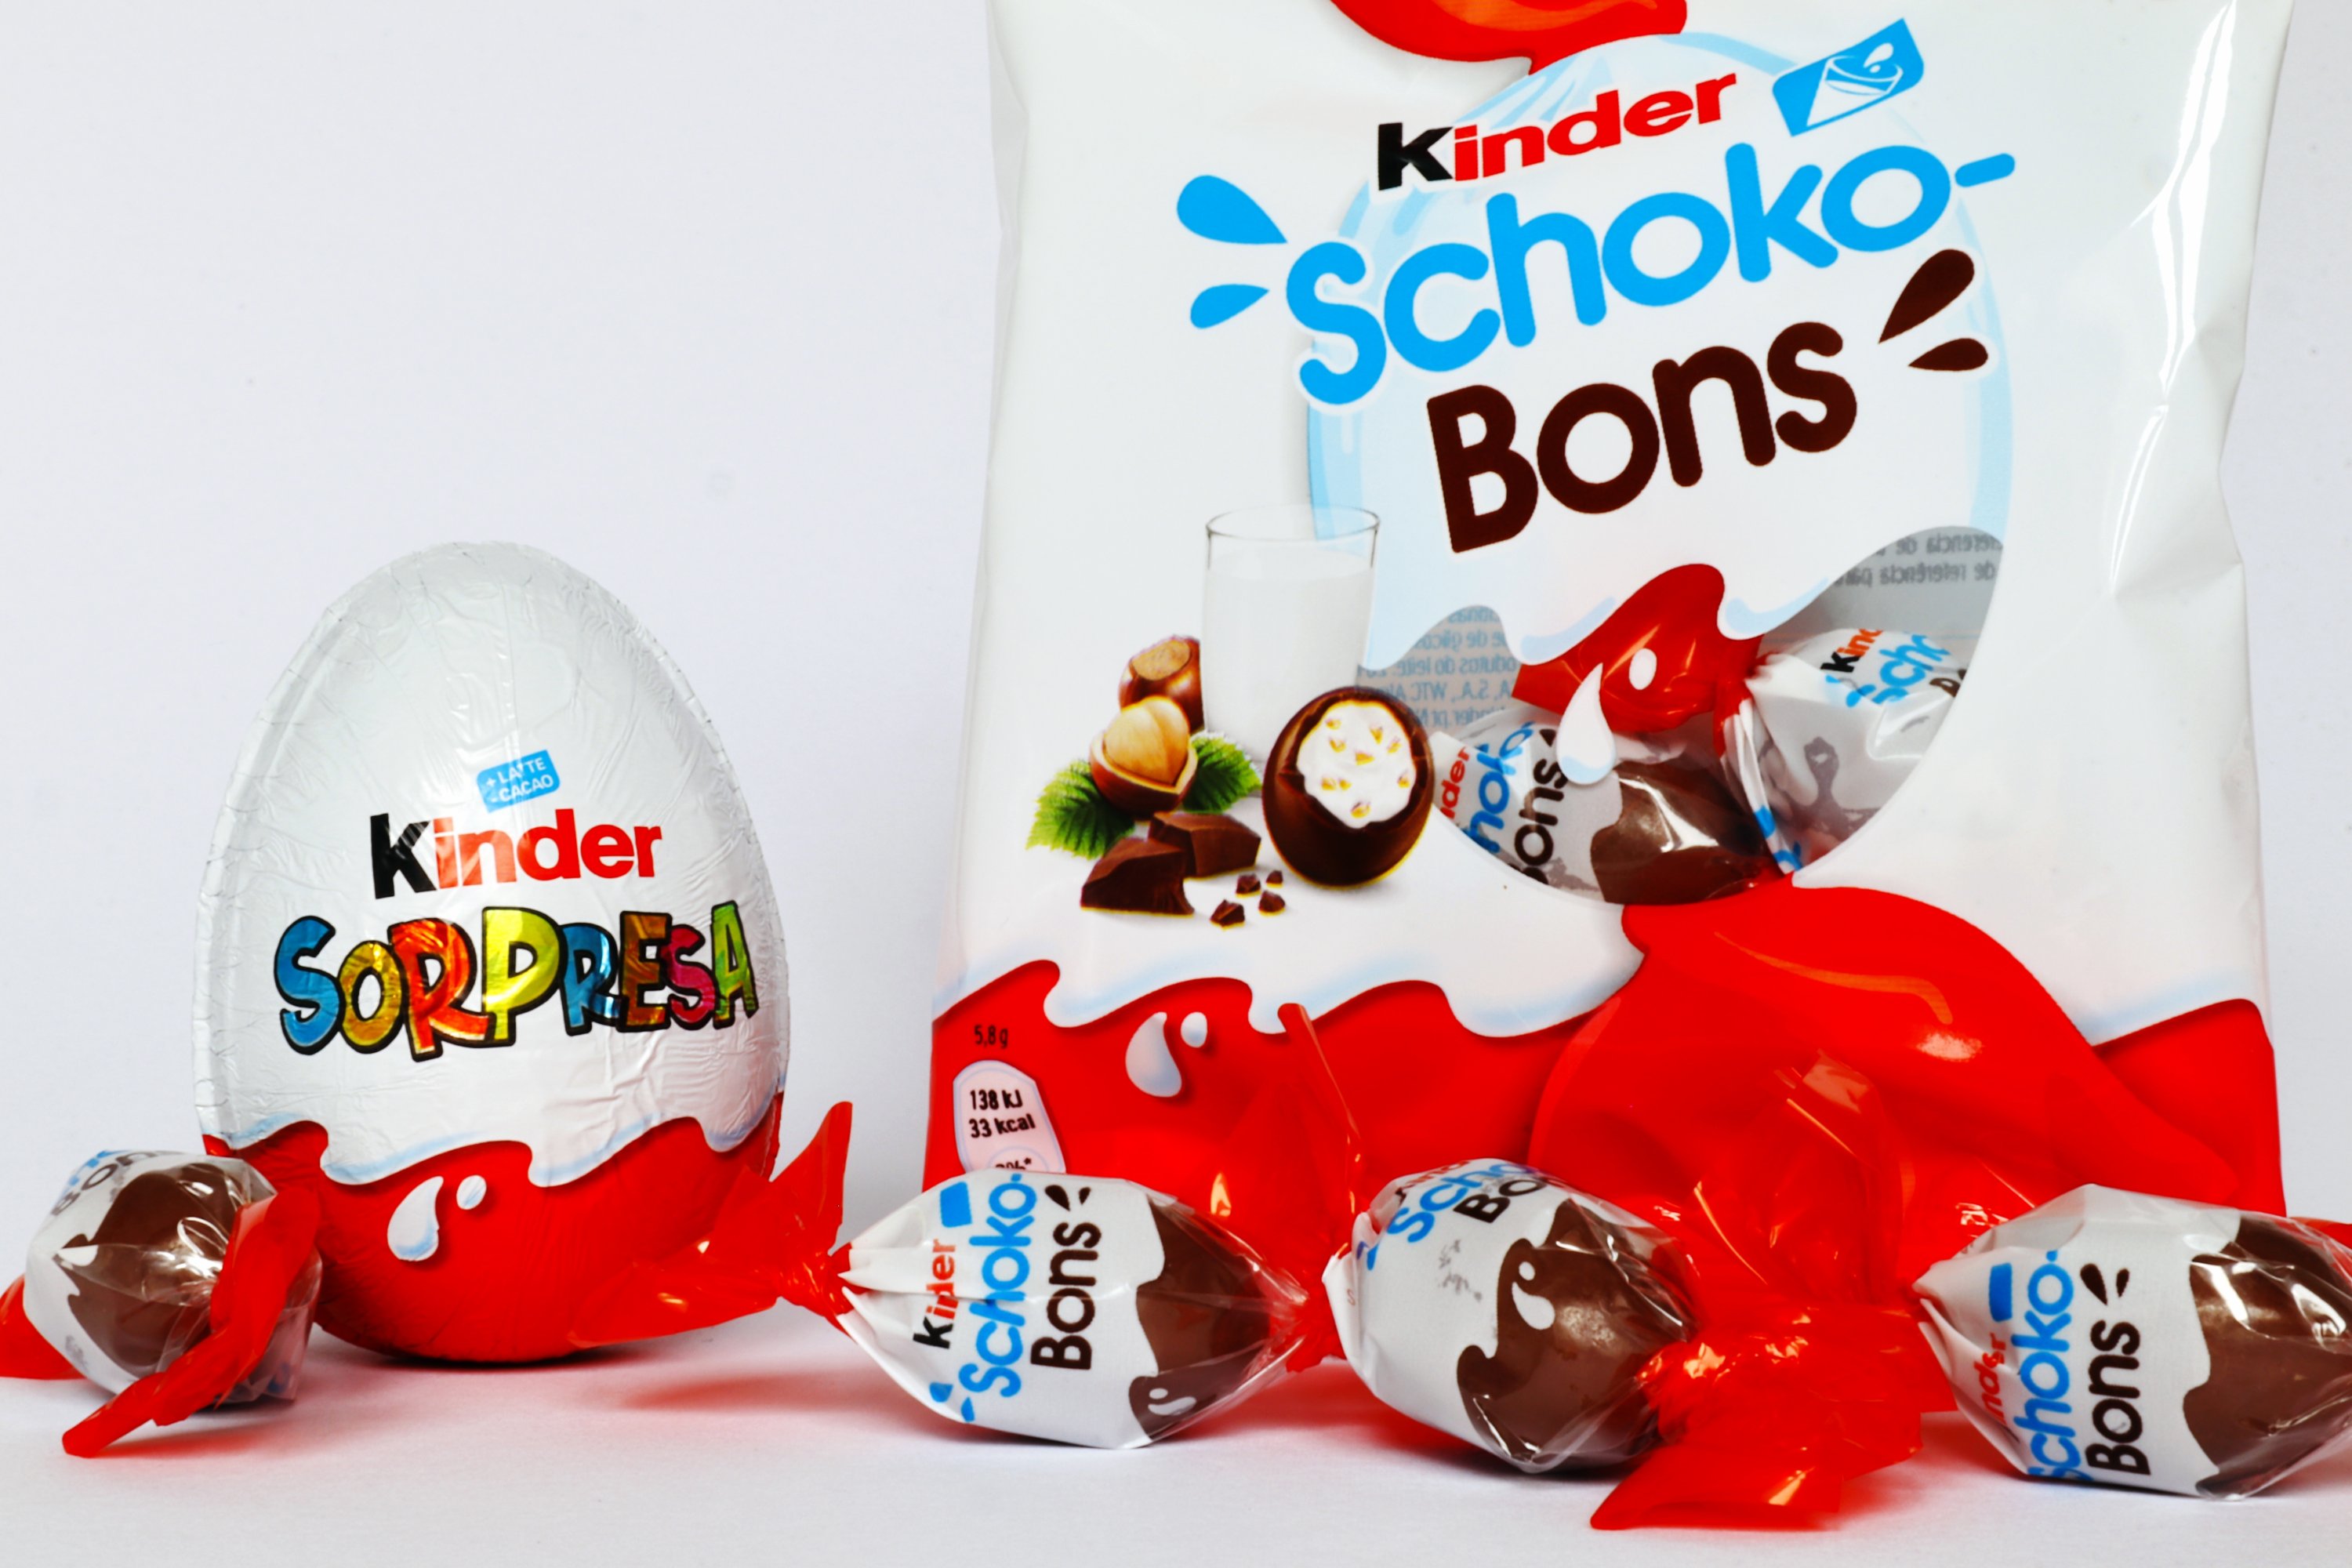 Turkish ministry recalls Kinder products over salmonella fears ...